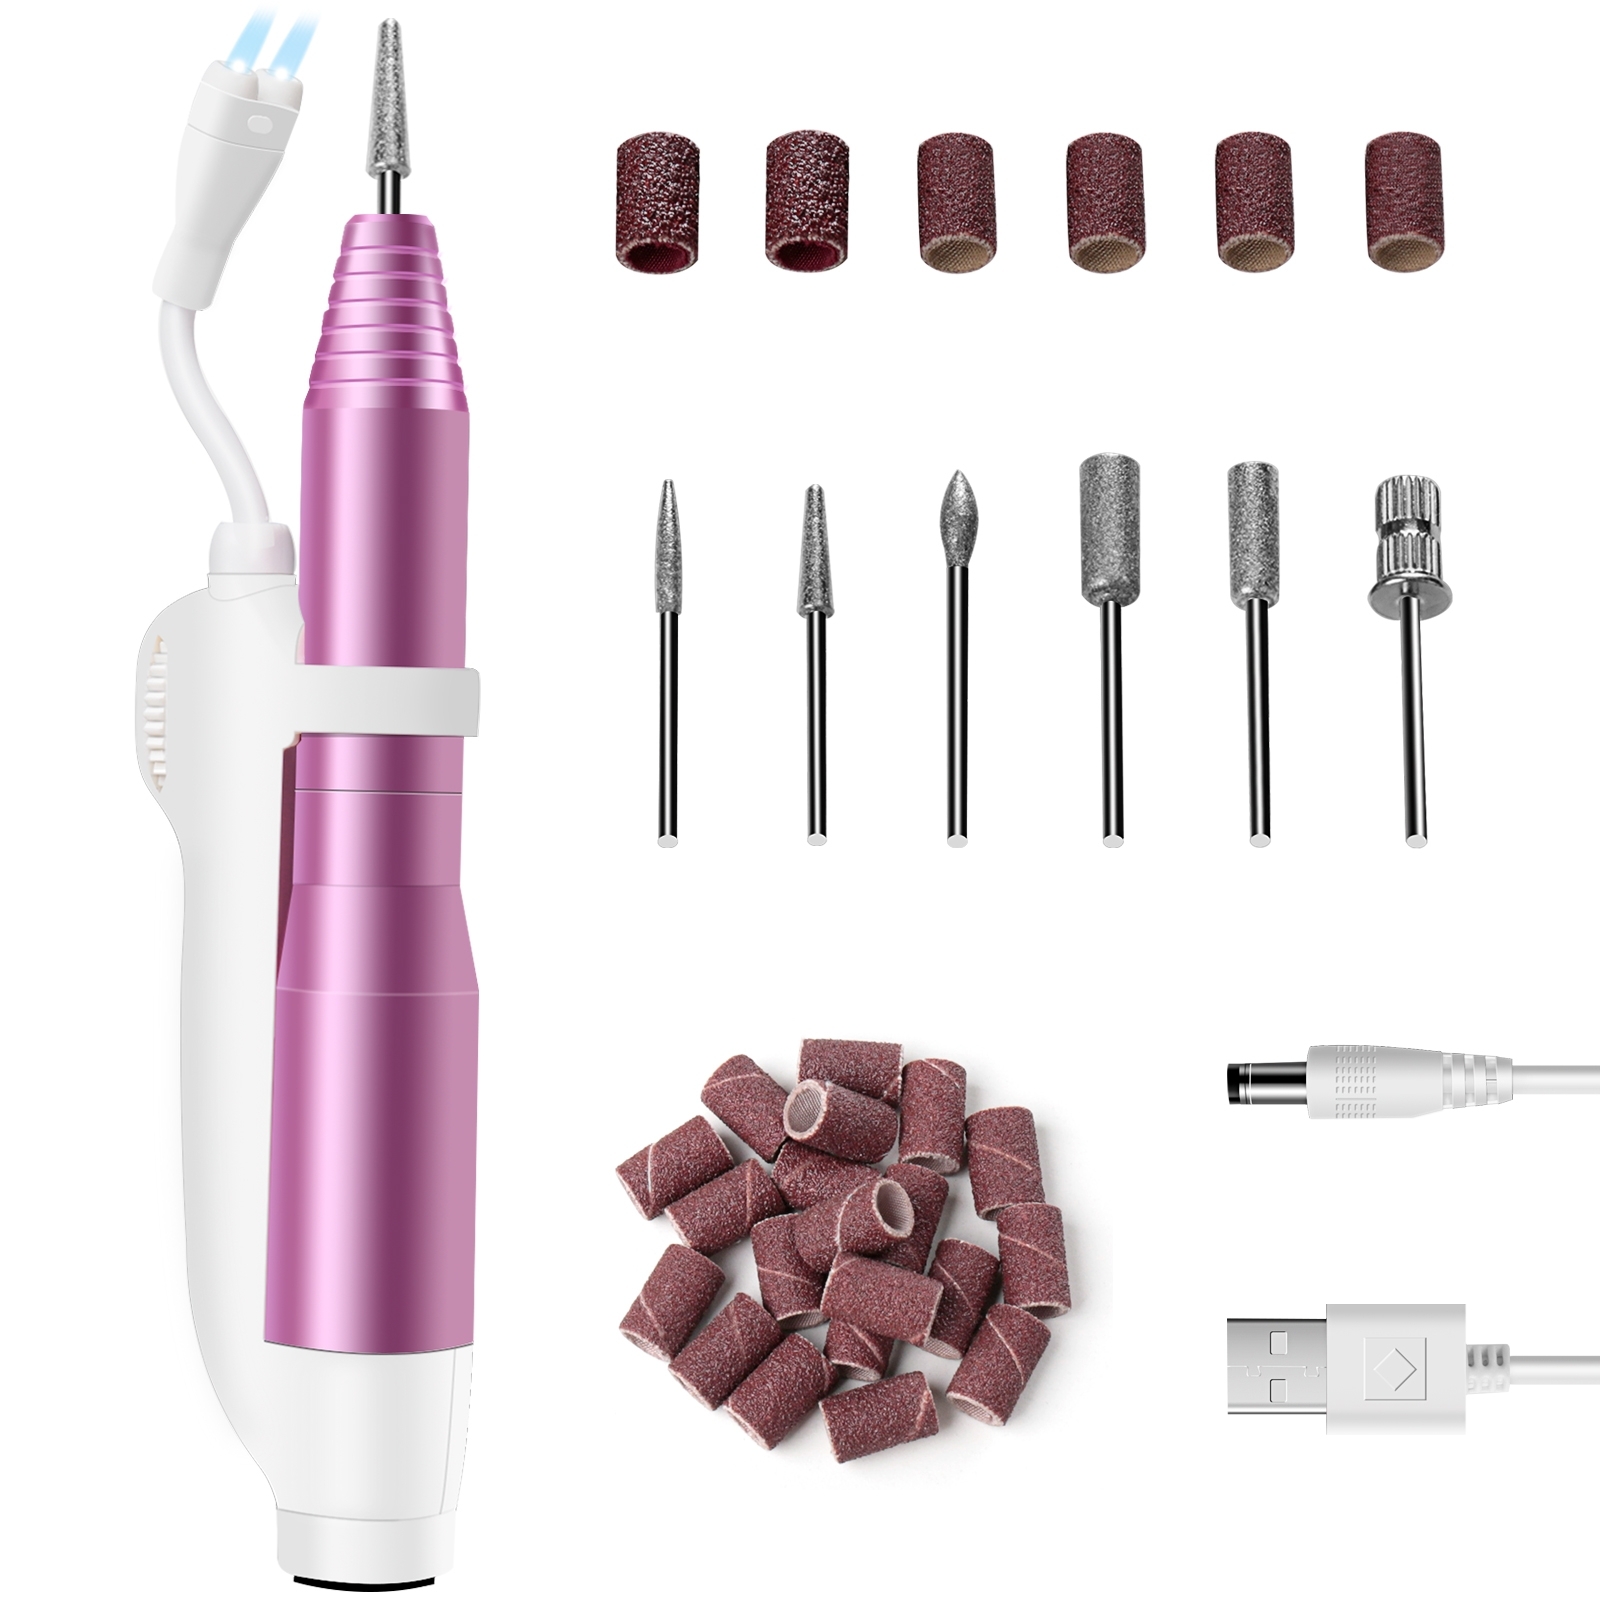 Electric Nail Drill Set with LED Lights, Professional Efile Nail File Kit Portable with 6pcs Nail Drill Bits for Acrylic Gel Nails, Manicure Pedicure Polishing Shape Tools for Home Salon Use